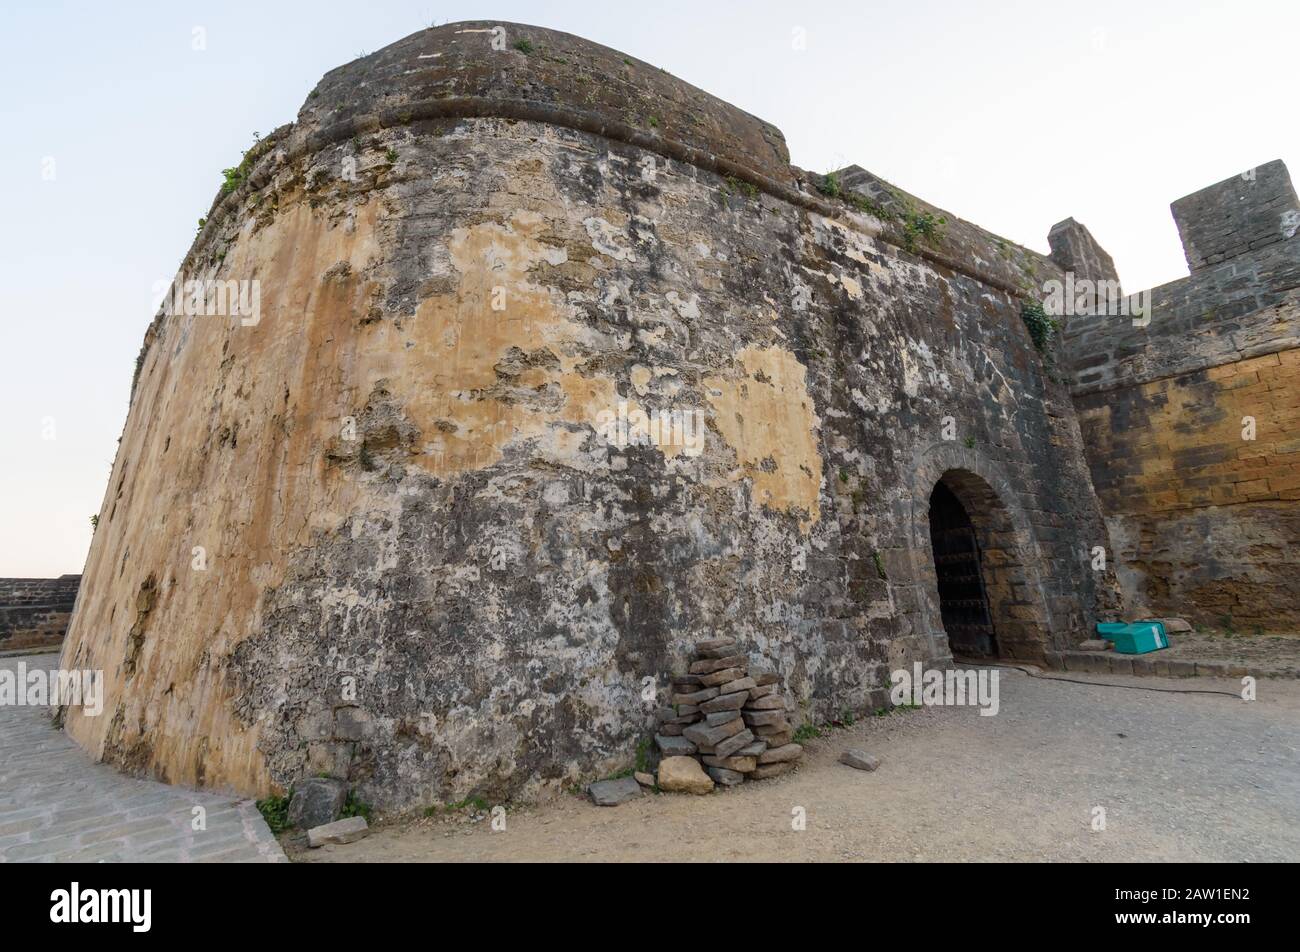 The exterior facade of a fortification inside the ancient Portuguese built fort in the island of Diu in India. Stock Photo